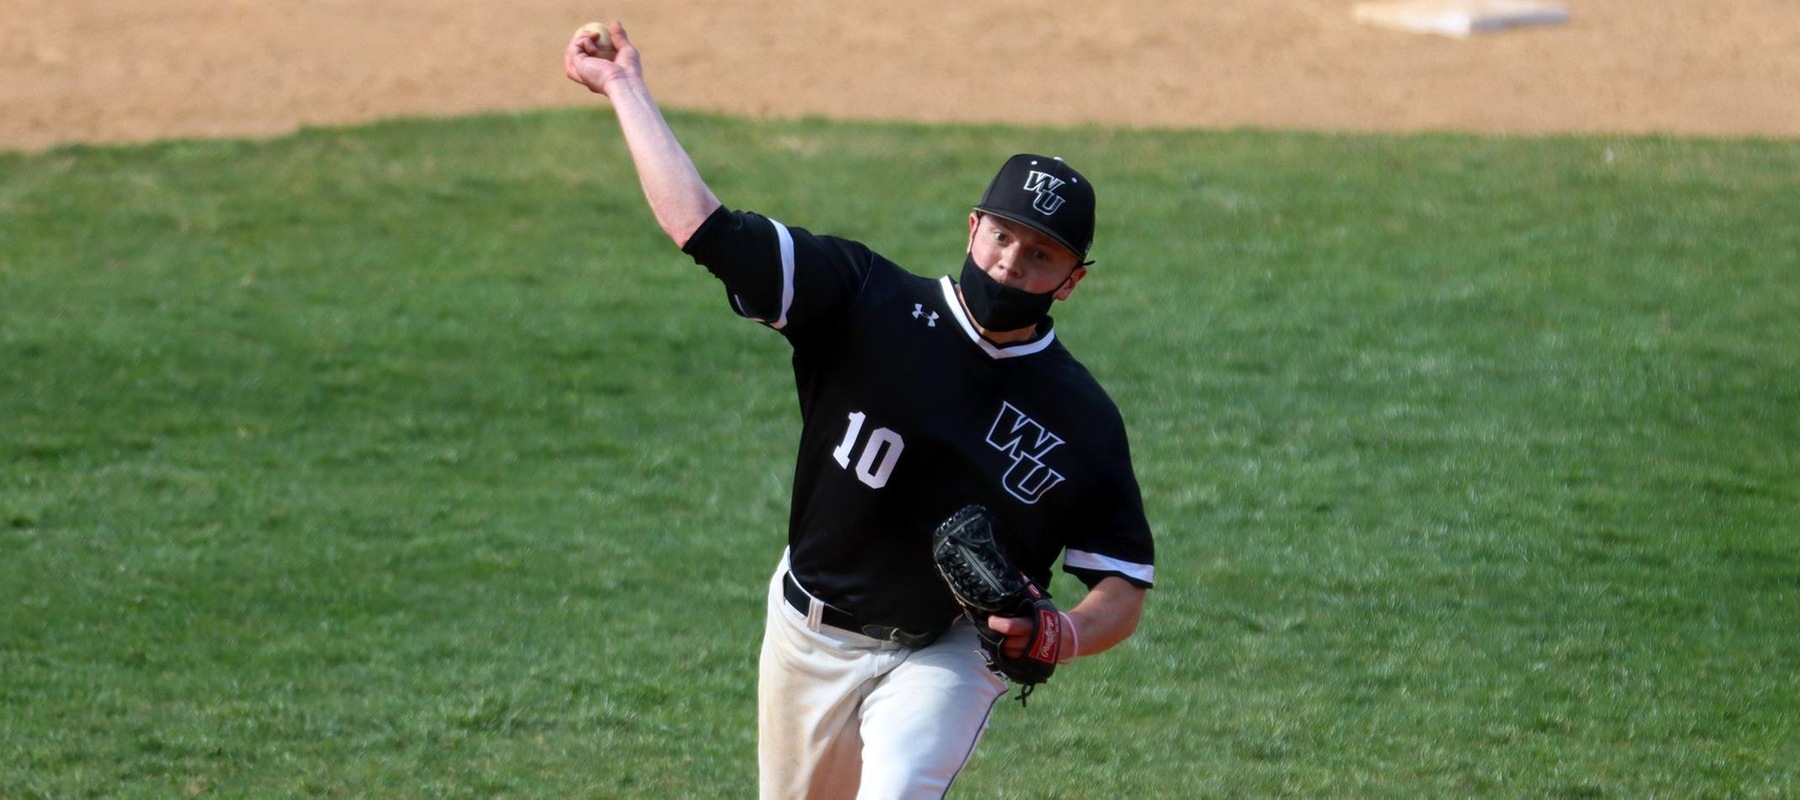 Photo of Dan Hyatt who pitched 7 winnings with 7 K's in game two against Jefferson. Copyright 2021; Wilmington University. All rights reserved. Photo by Dan Lauletta. April 18, 2021 vs. Jefferson.